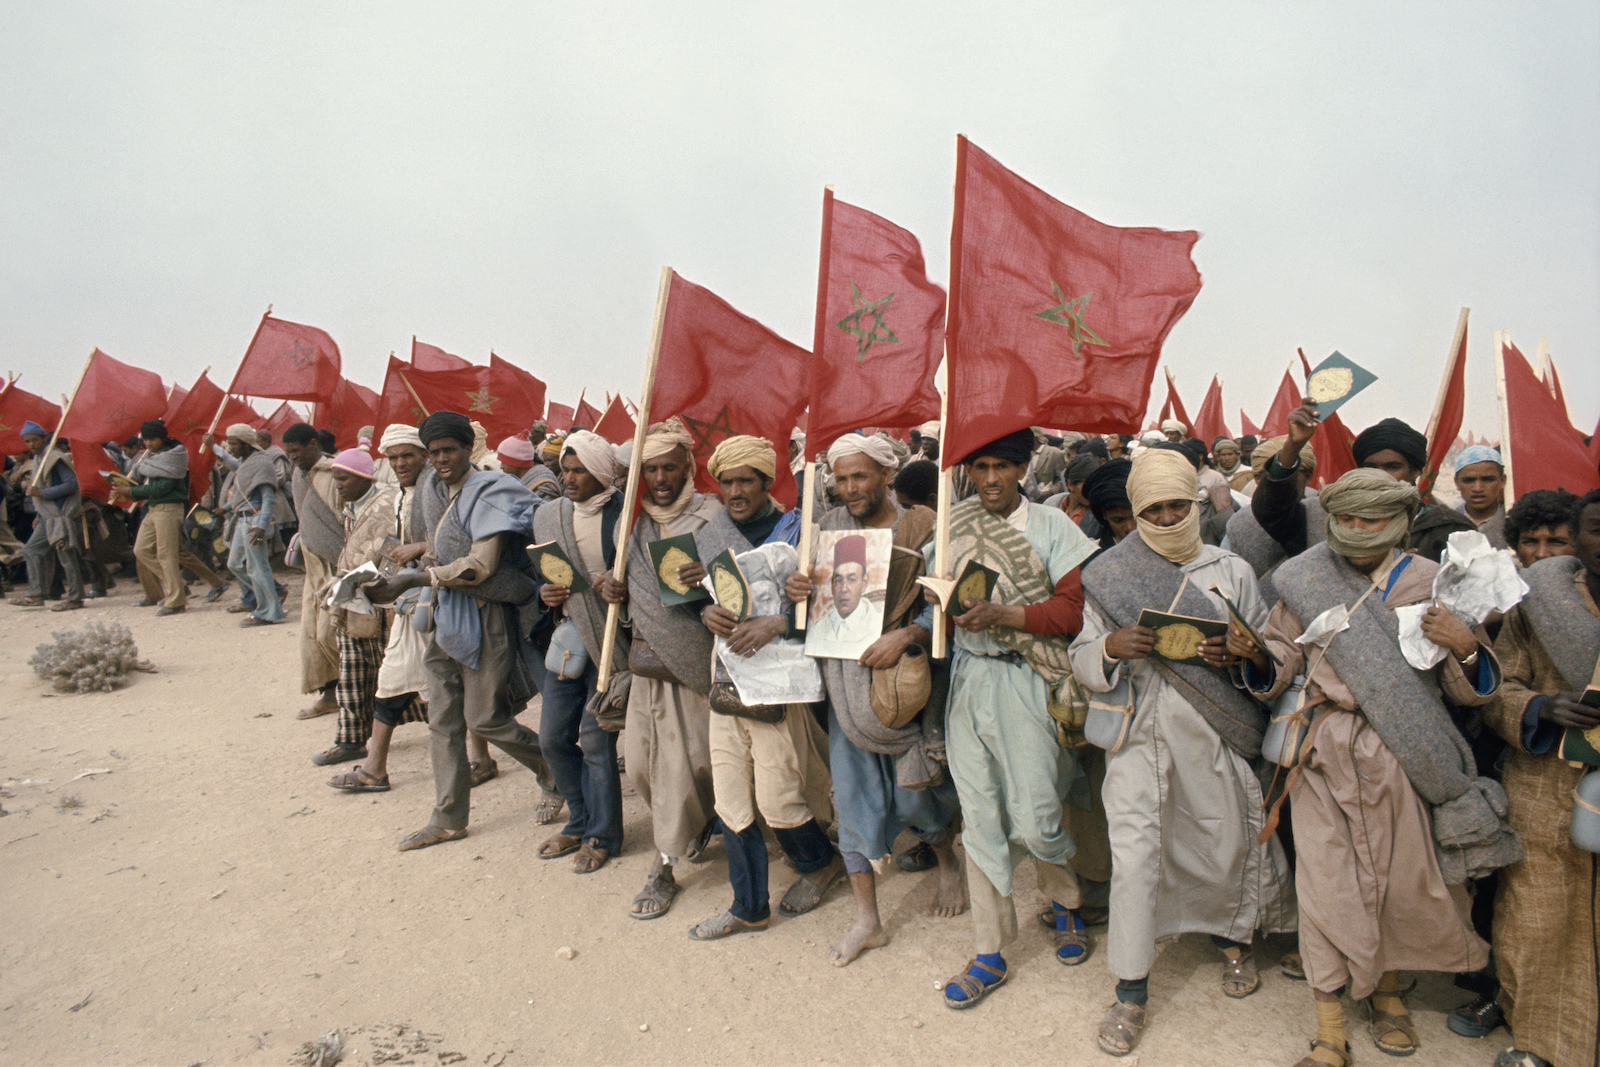 Around 350,000 Moroccans march into Western Sahara in the Green March in protest against Spanish occupation, November 1975. Photo by Patrick Jarnoux/Paris Match via Getty Images.